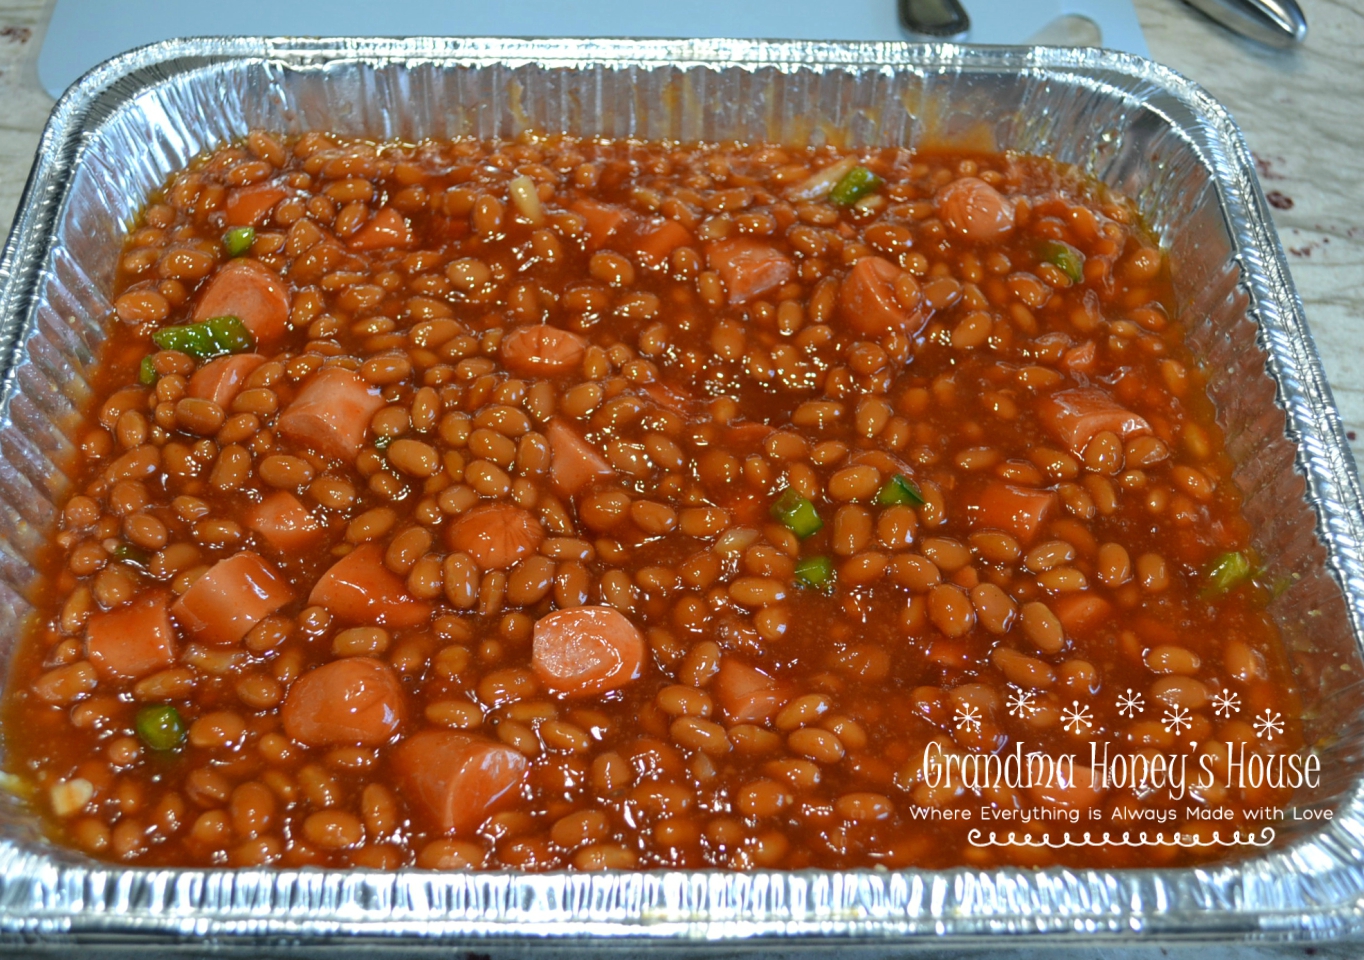 BAKED BEANS AND WIENERS